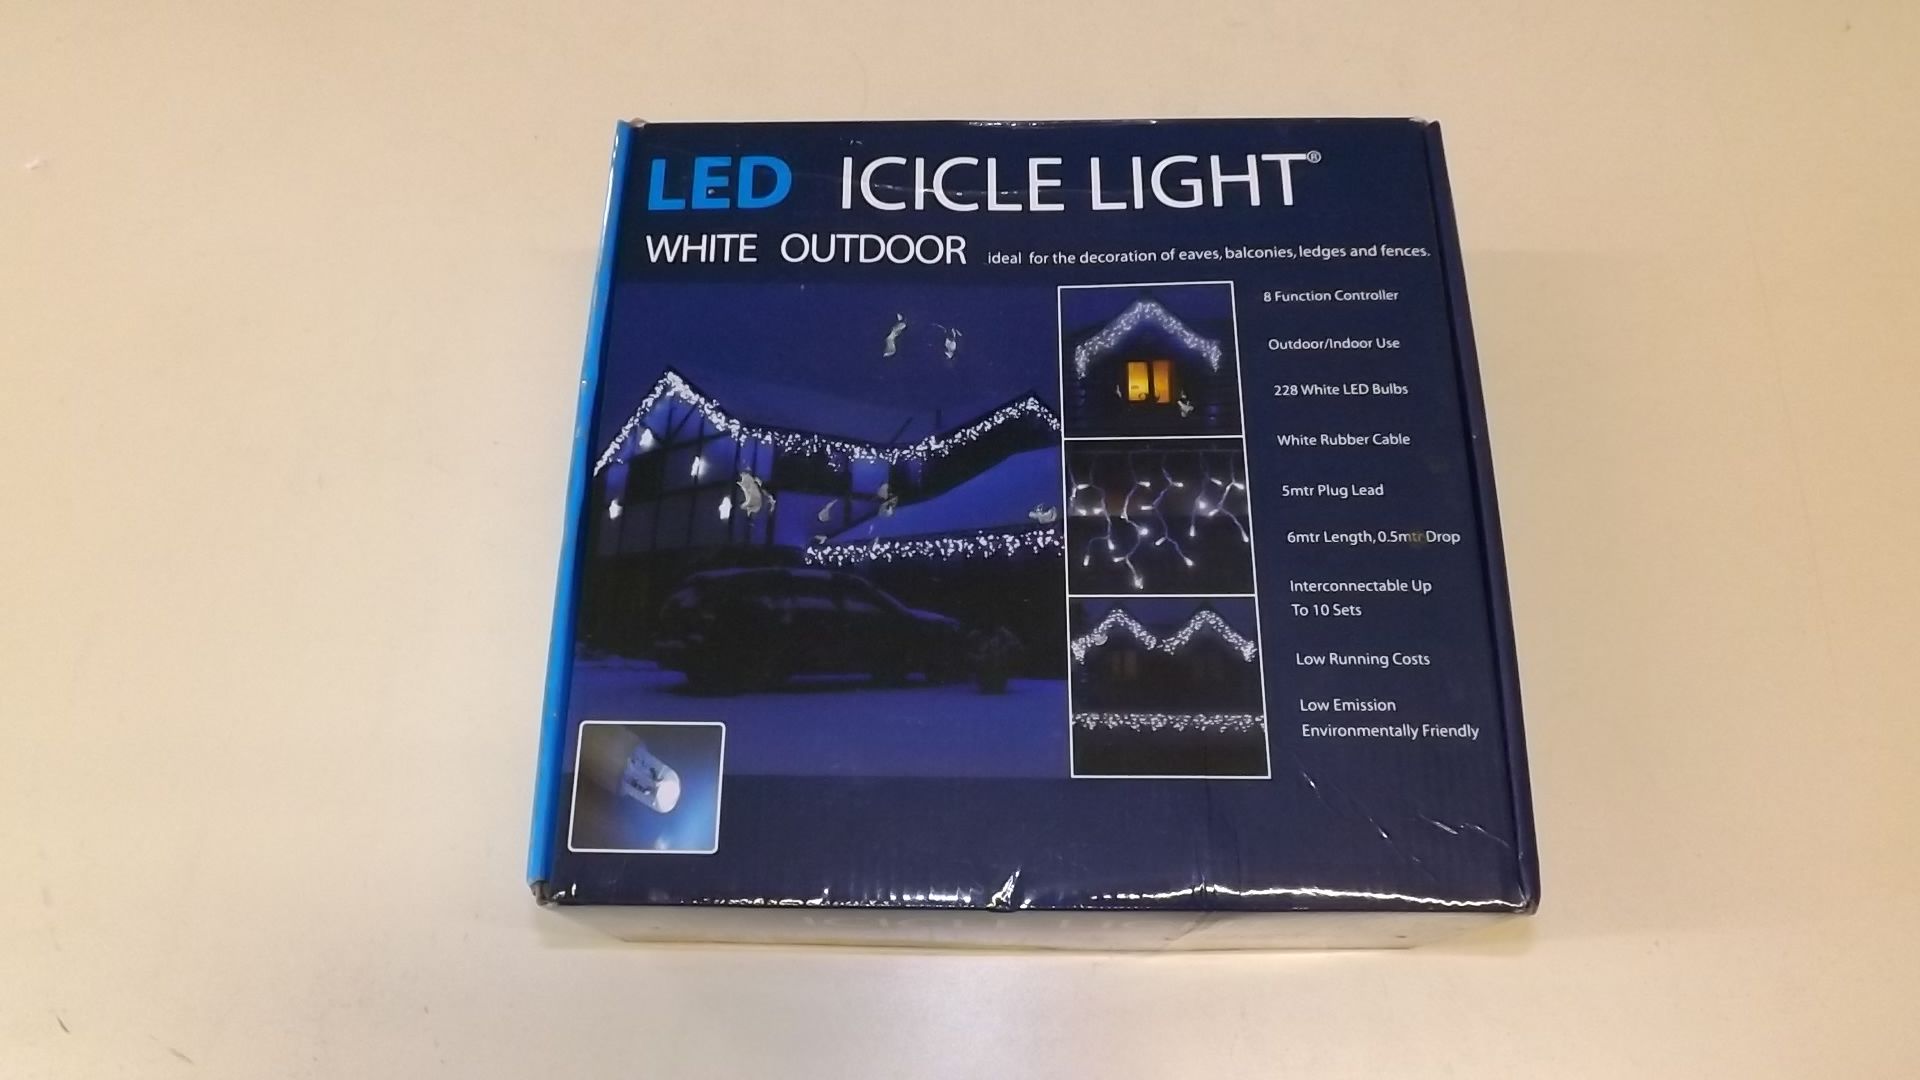 1 BOXED LED ICICLE LIGHT RRP £42.99